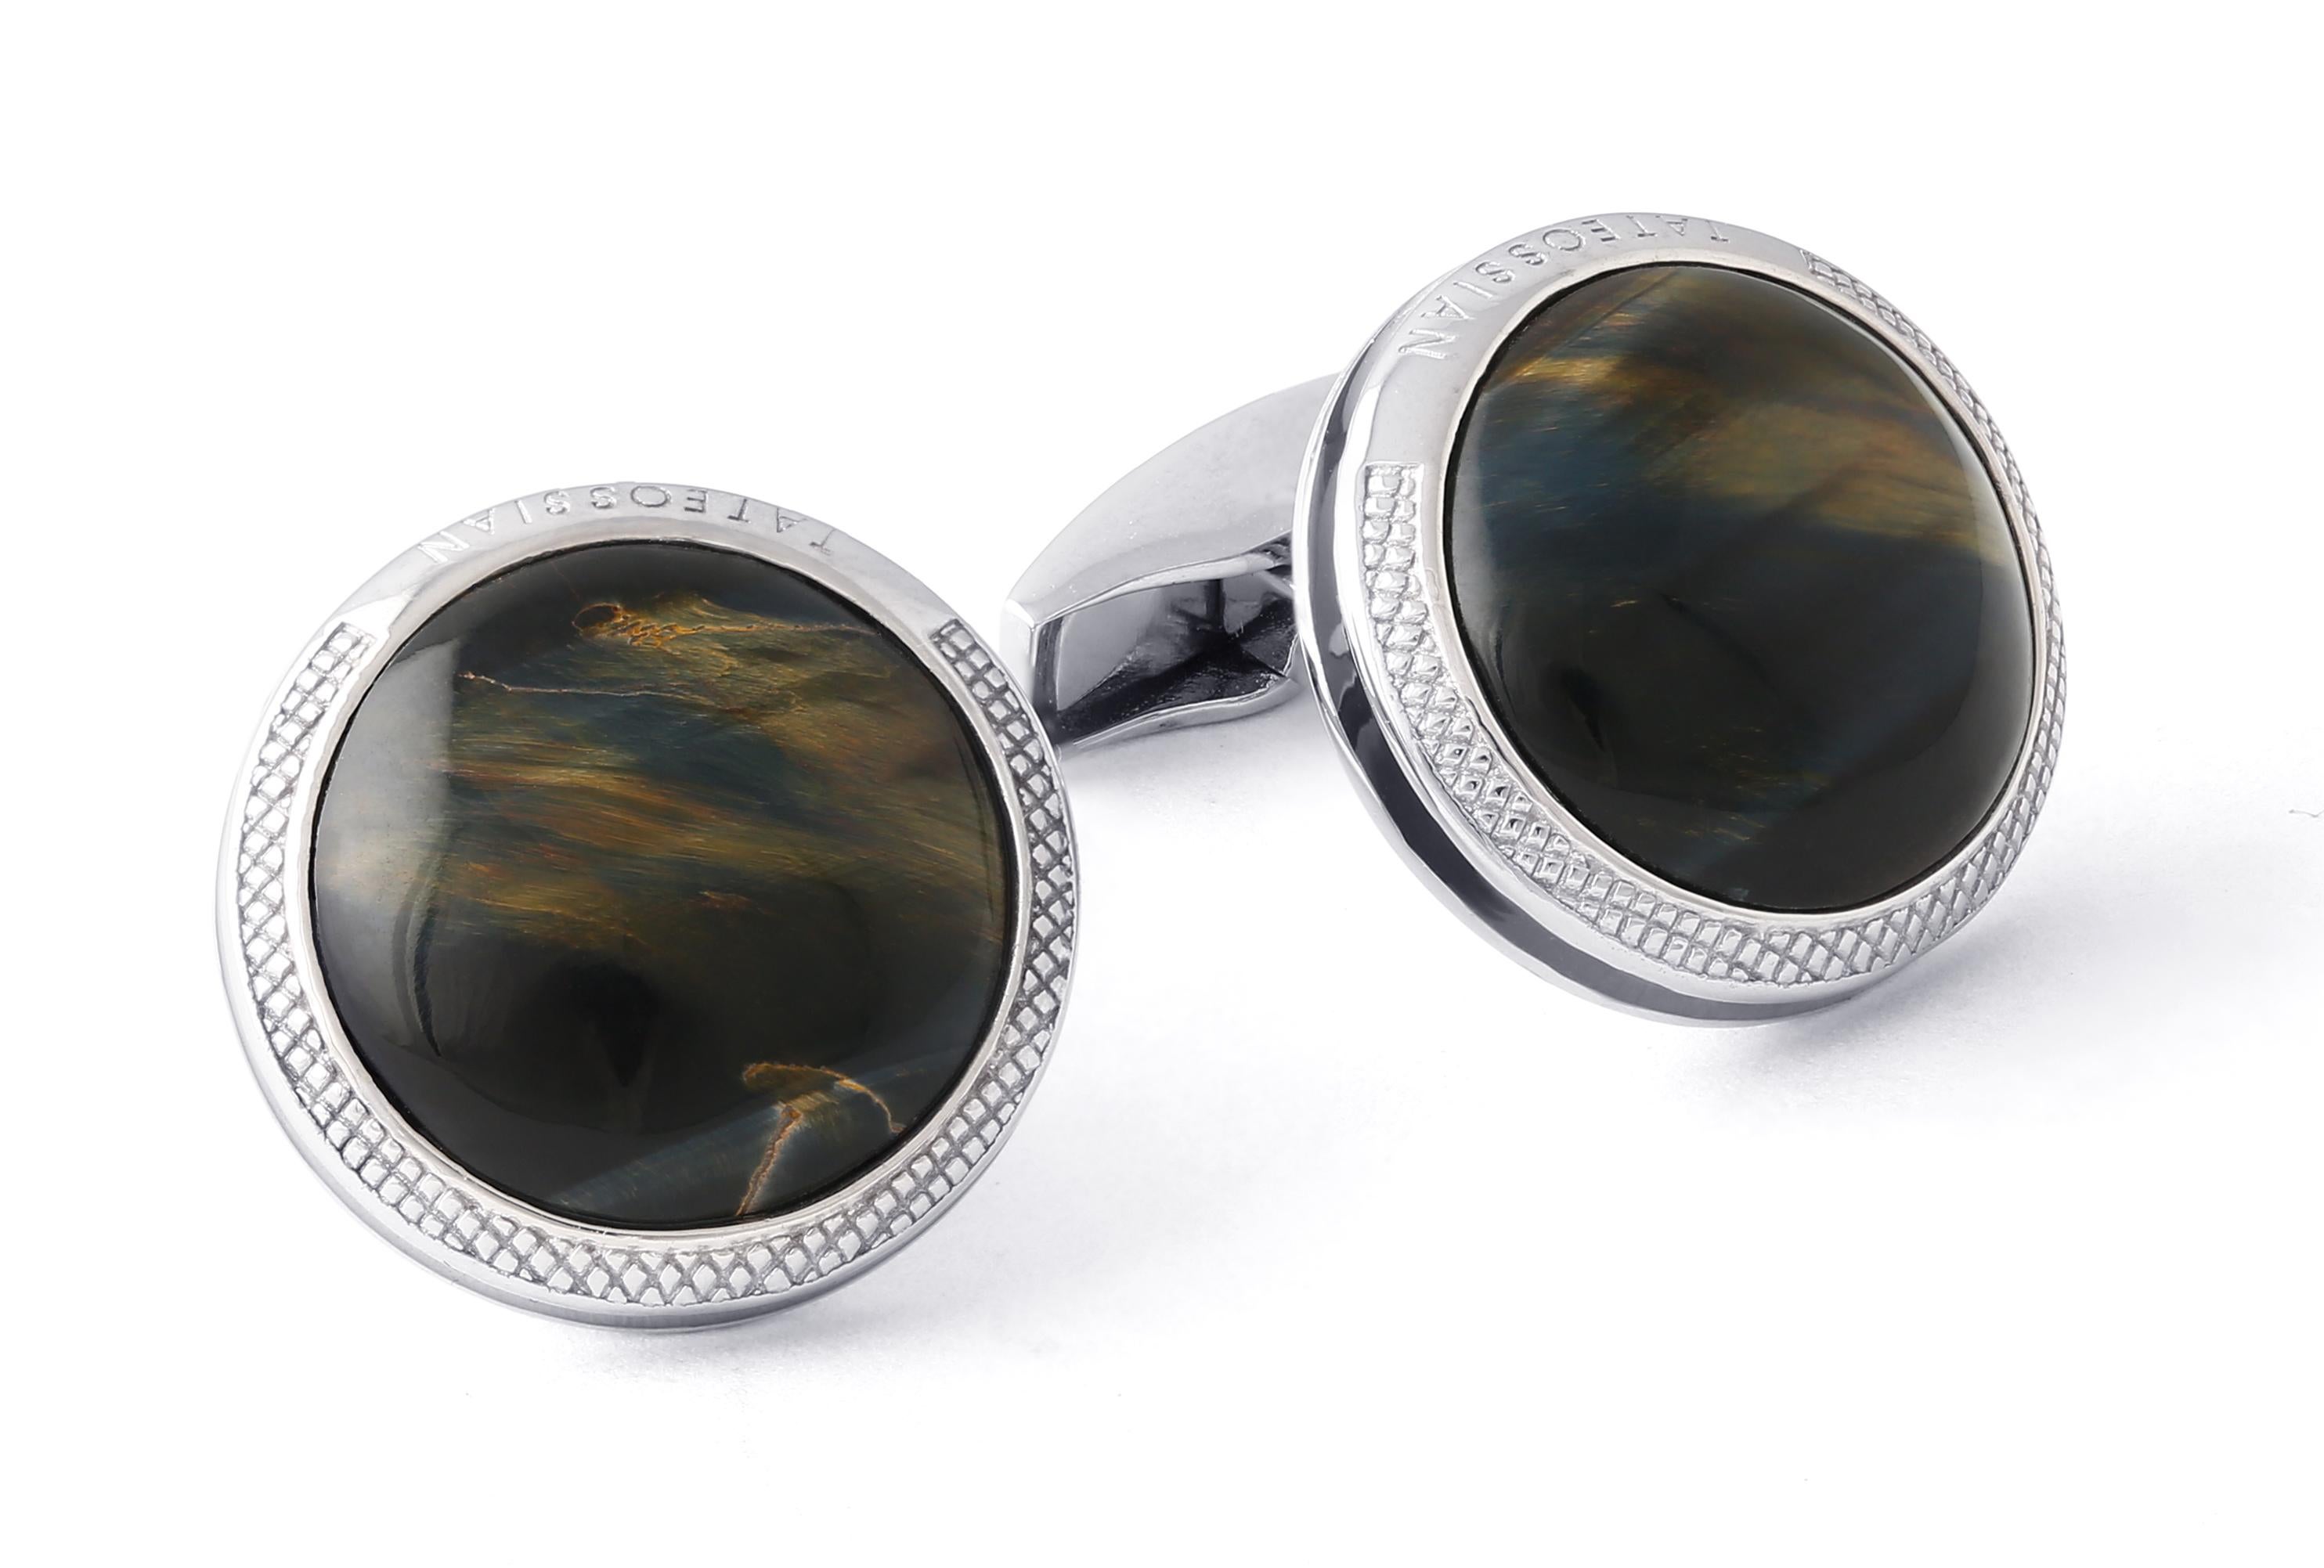 The spectacular array of colours featured in each tiger eye range from stunning blues to exotic yellows. Featuring chatoyance - the optical phenomenon in which a band of reflected light (cats-eye) moves just beneath the surface of the stone, each